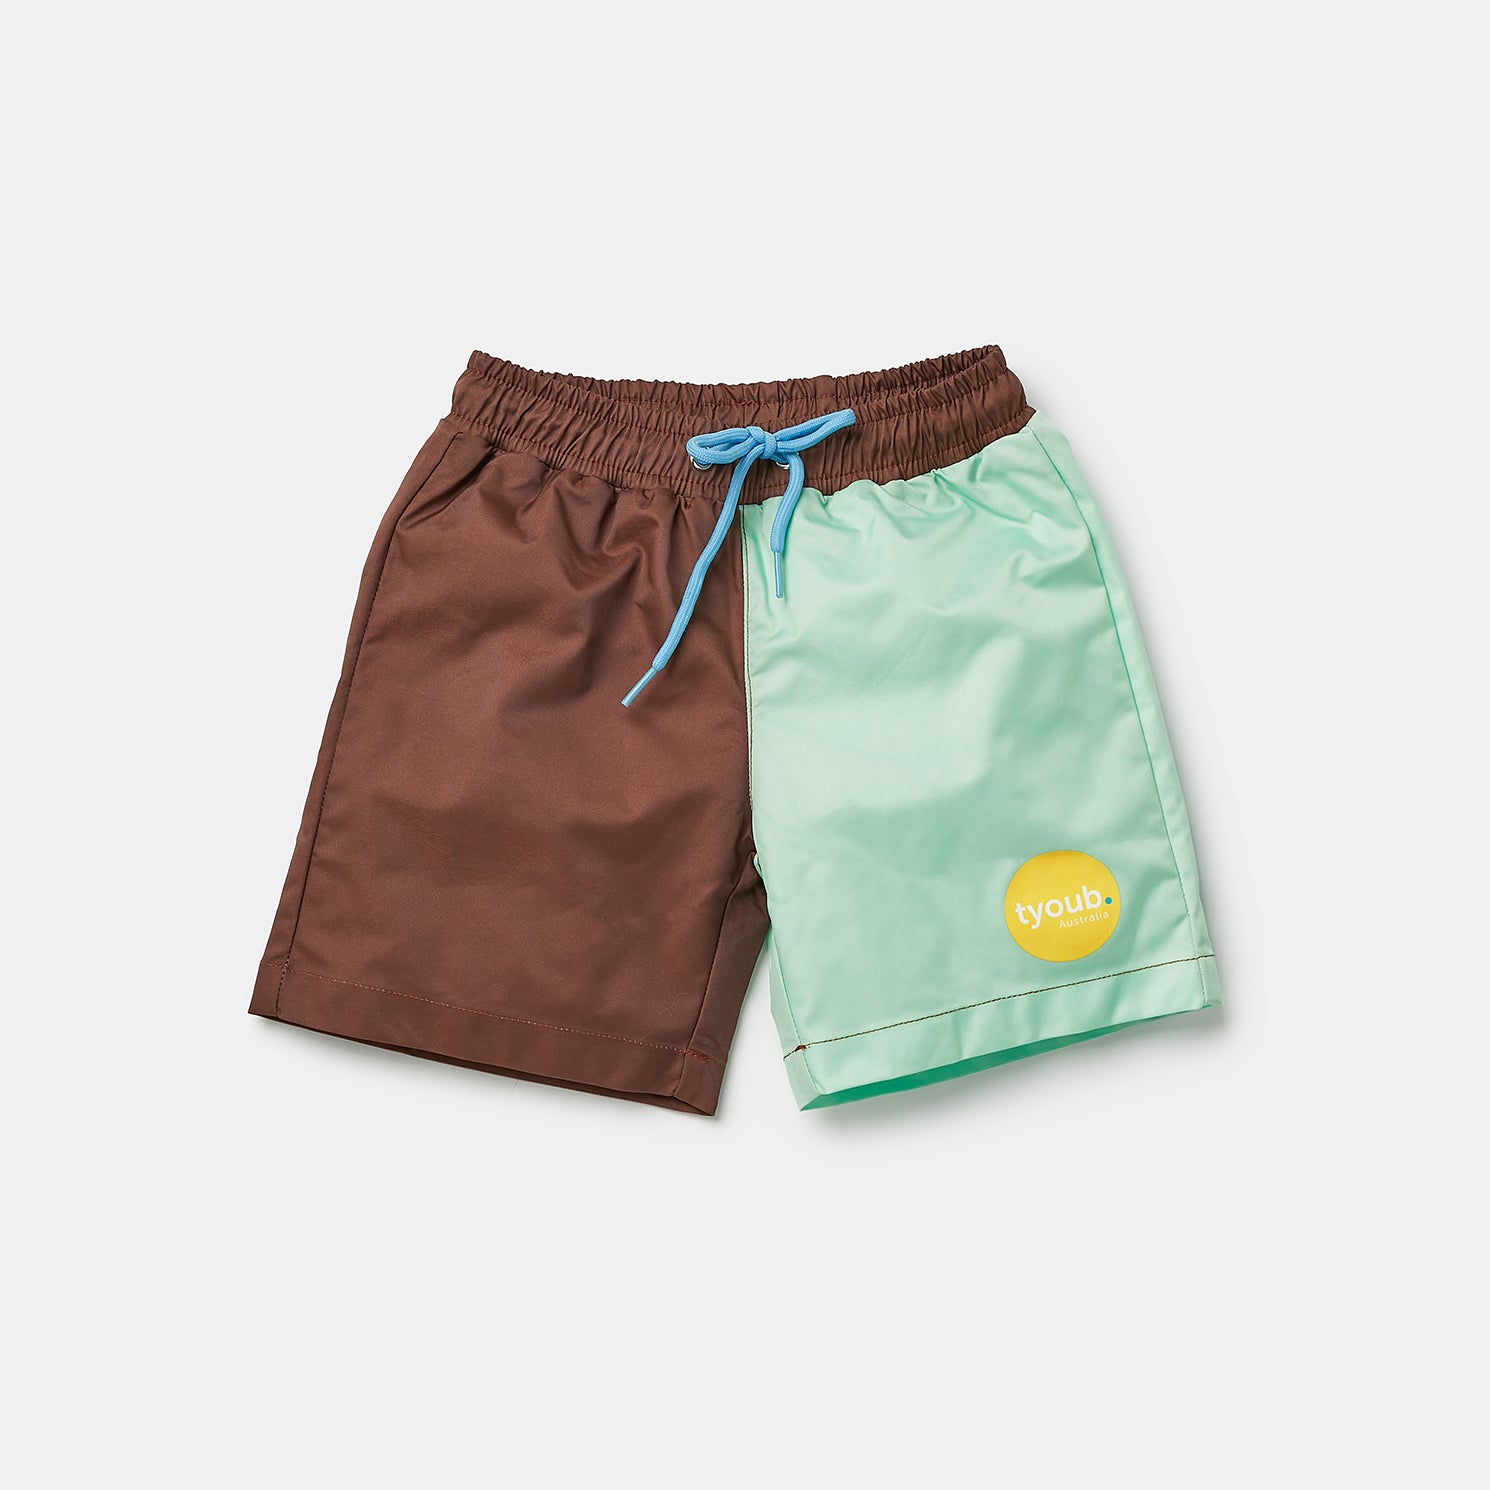 Tyoub Kids Quick Dry Boardshorts  Recycled Material Mint | Brown